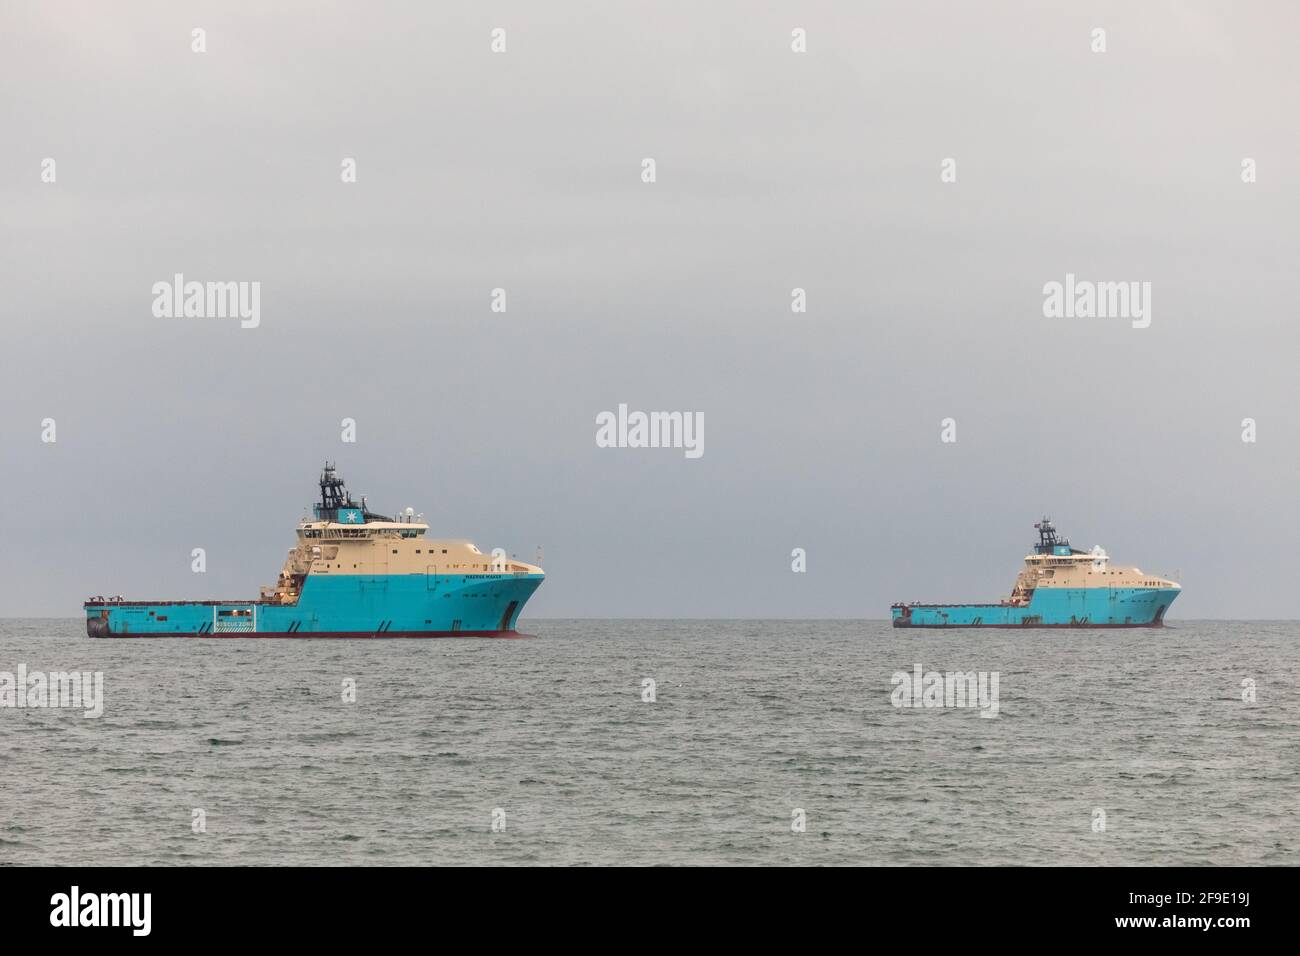 Myrtleville, Cork, Ireland. 18th April, 2021. Danish registered offshore supply ships Maersk Maker and Maersk Mariner lie at anchor off Myrtleville, Co. Cork. The tugs were used to tow the giant rig Stena Spey to the Kinsale gas field from Scapa Flow, UK and will used in subsea well plugging and decommissioning of the gas field.    - Credit David Creedon / Alamy Live News Stock Photo